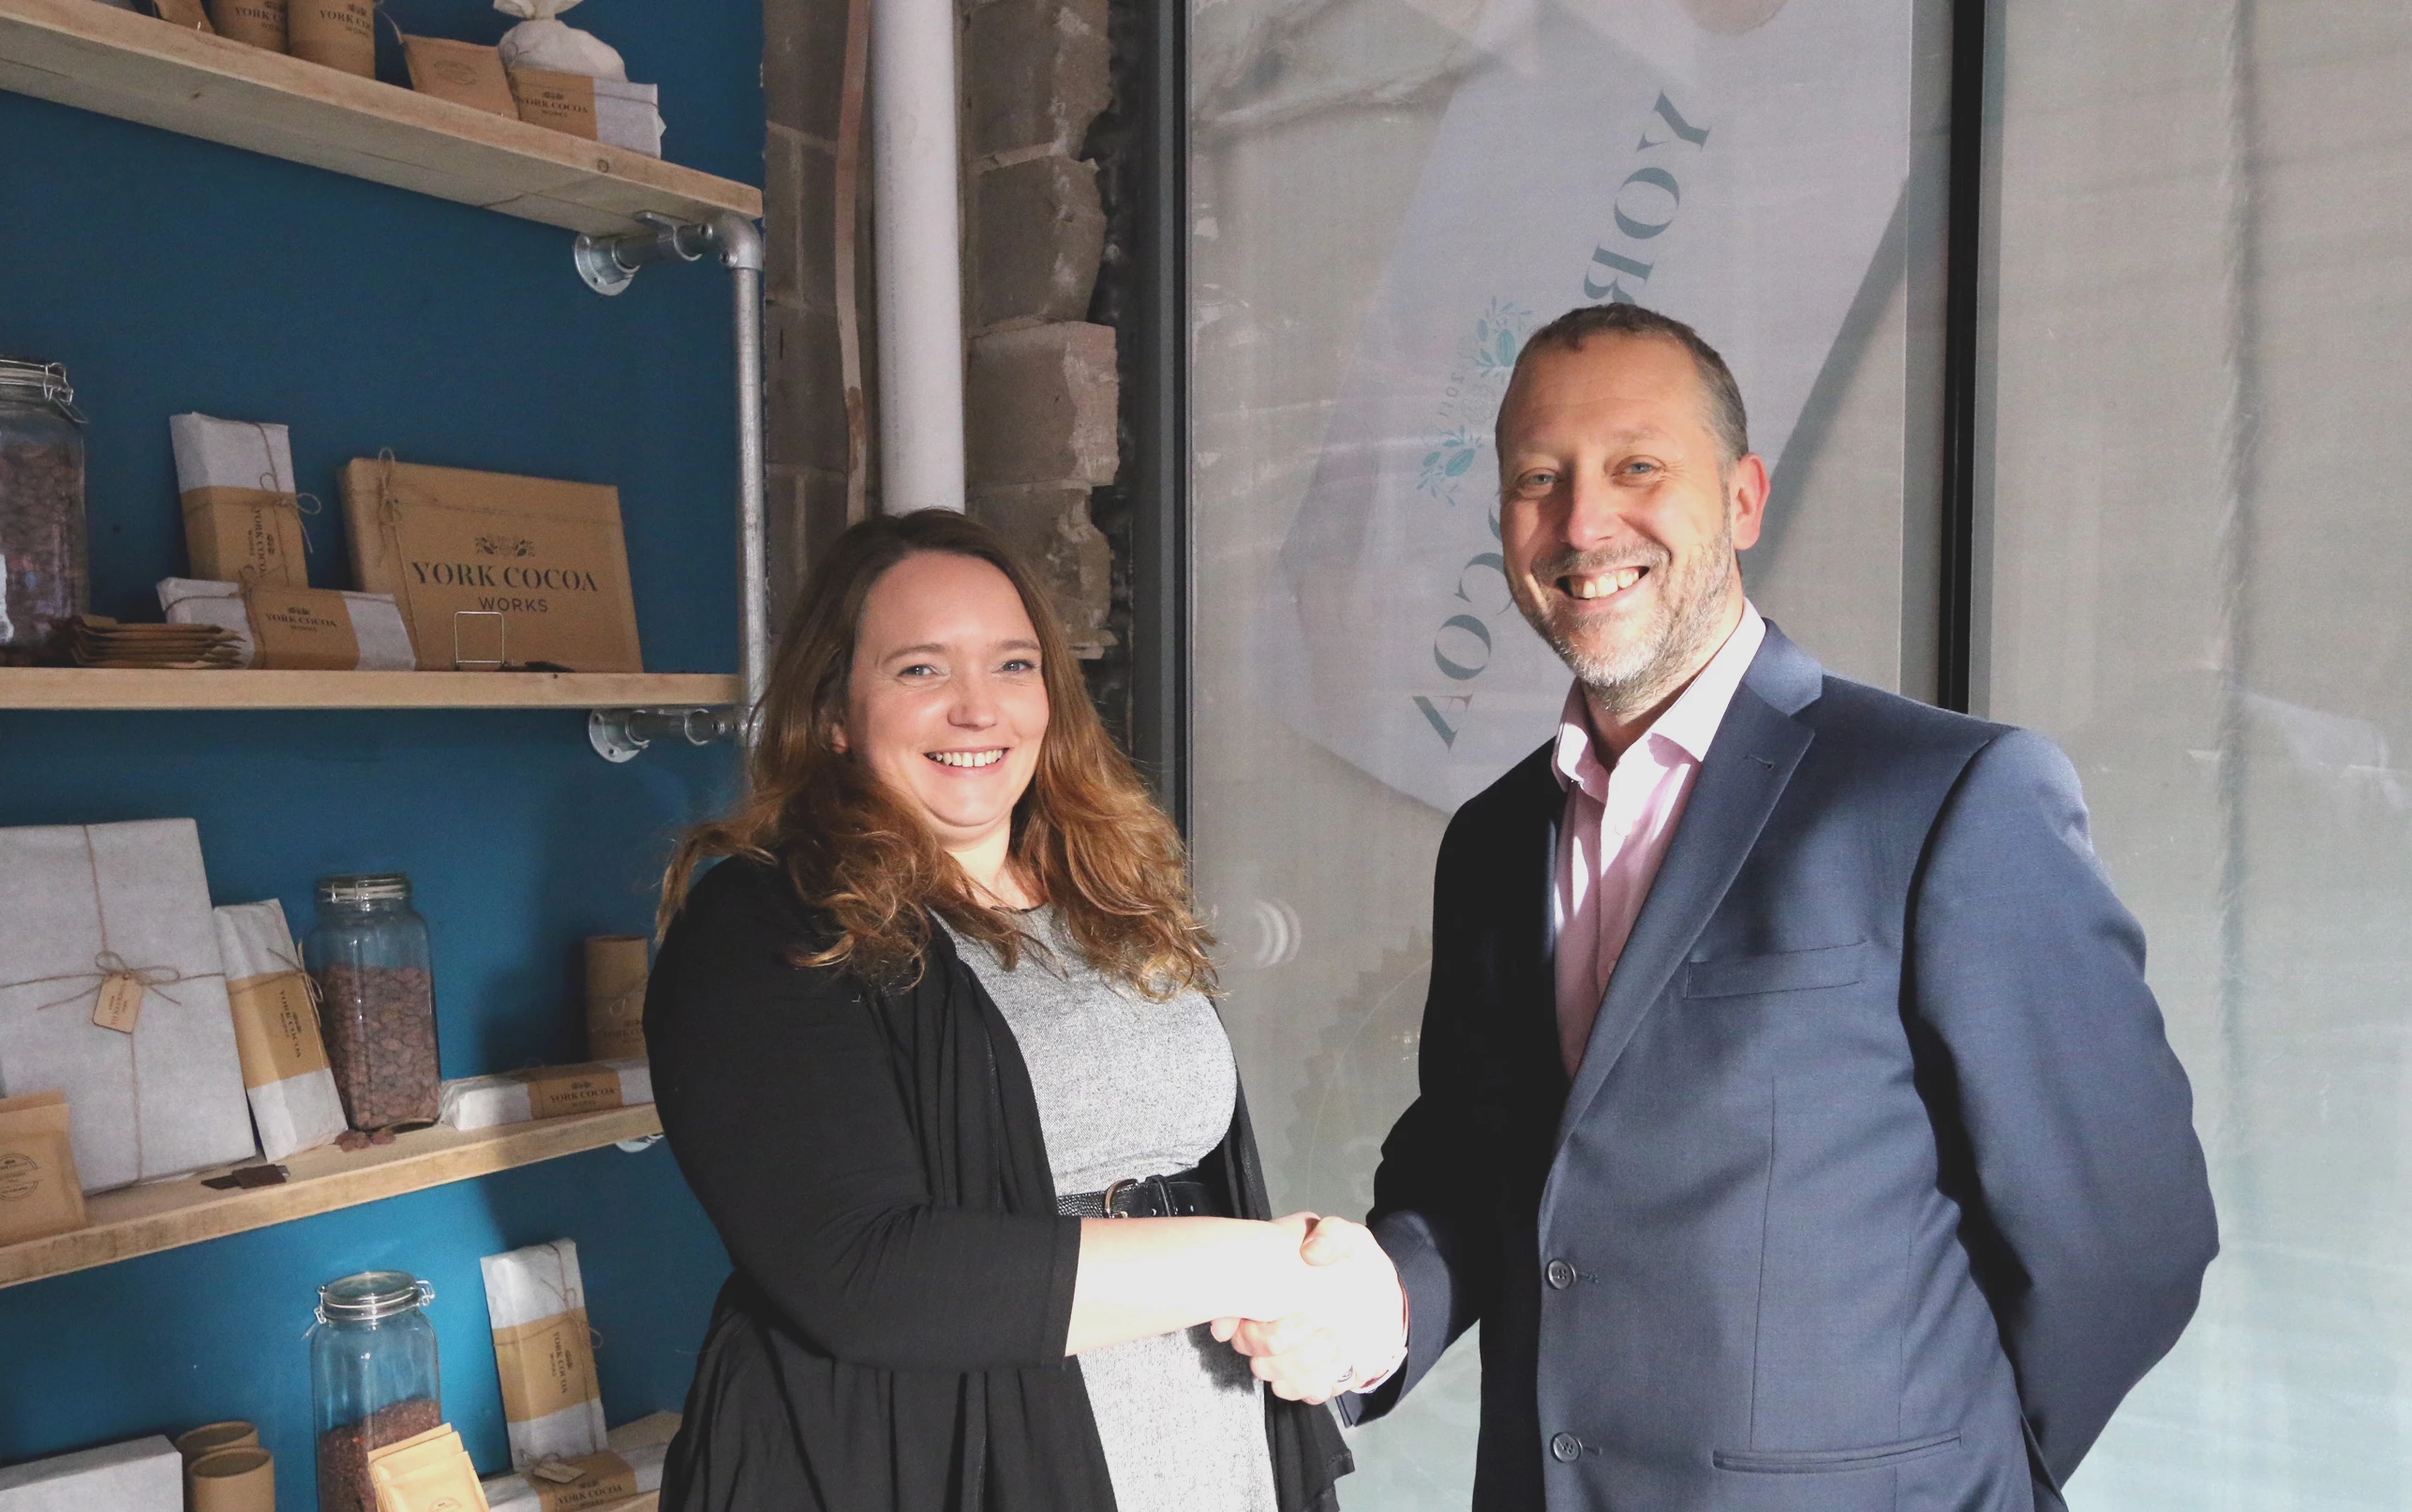  Richard Elam (Director at Evora Construction) and Sophie Jewett (Founder & Managing Director of York Cocoa Works)